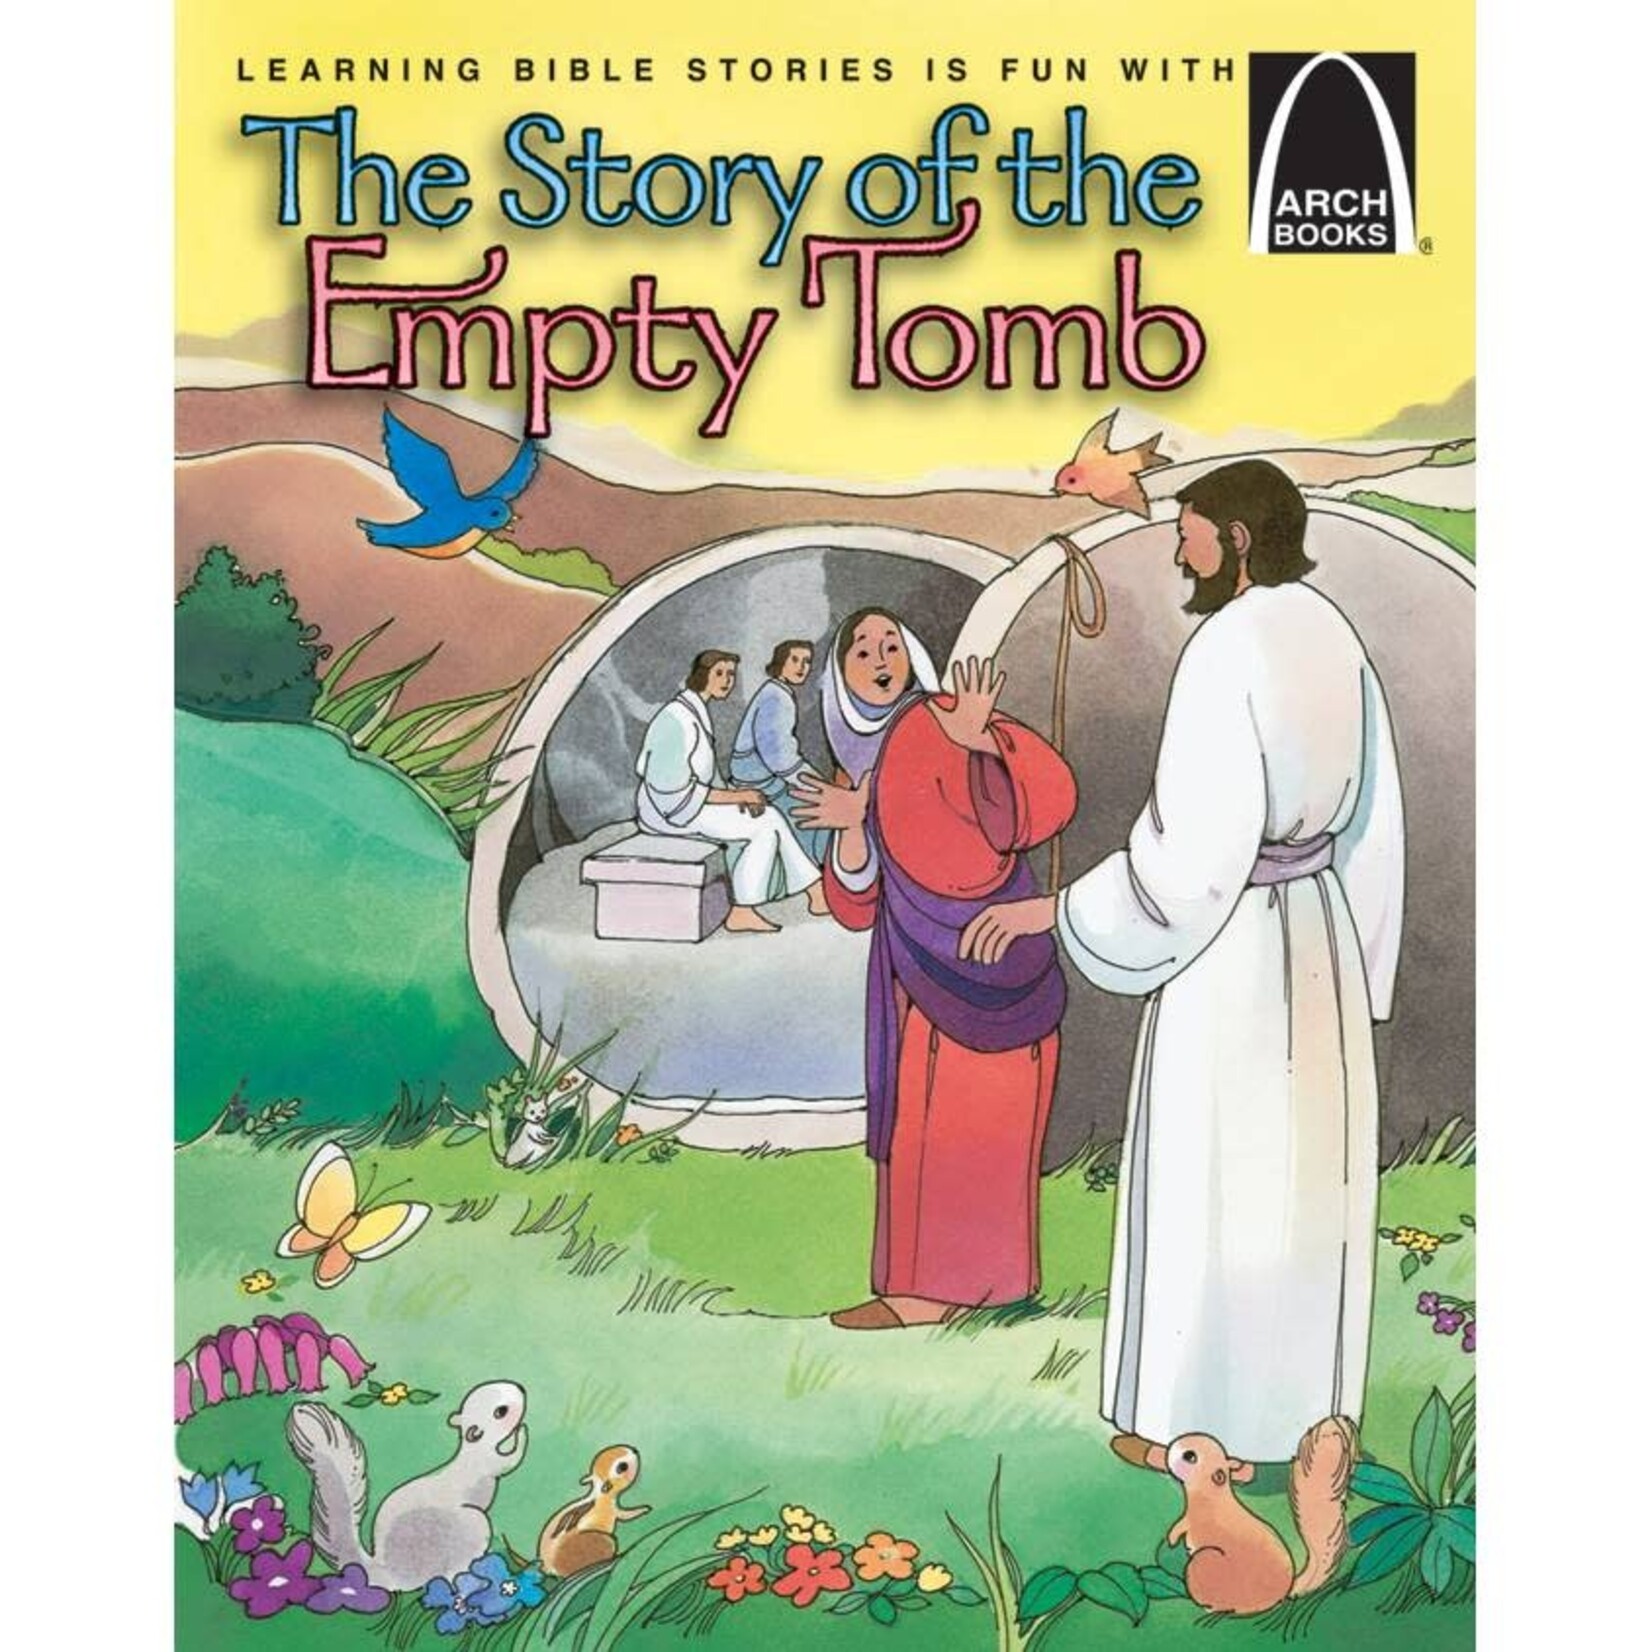 The Story of the Empty Tomb (Arch Book)